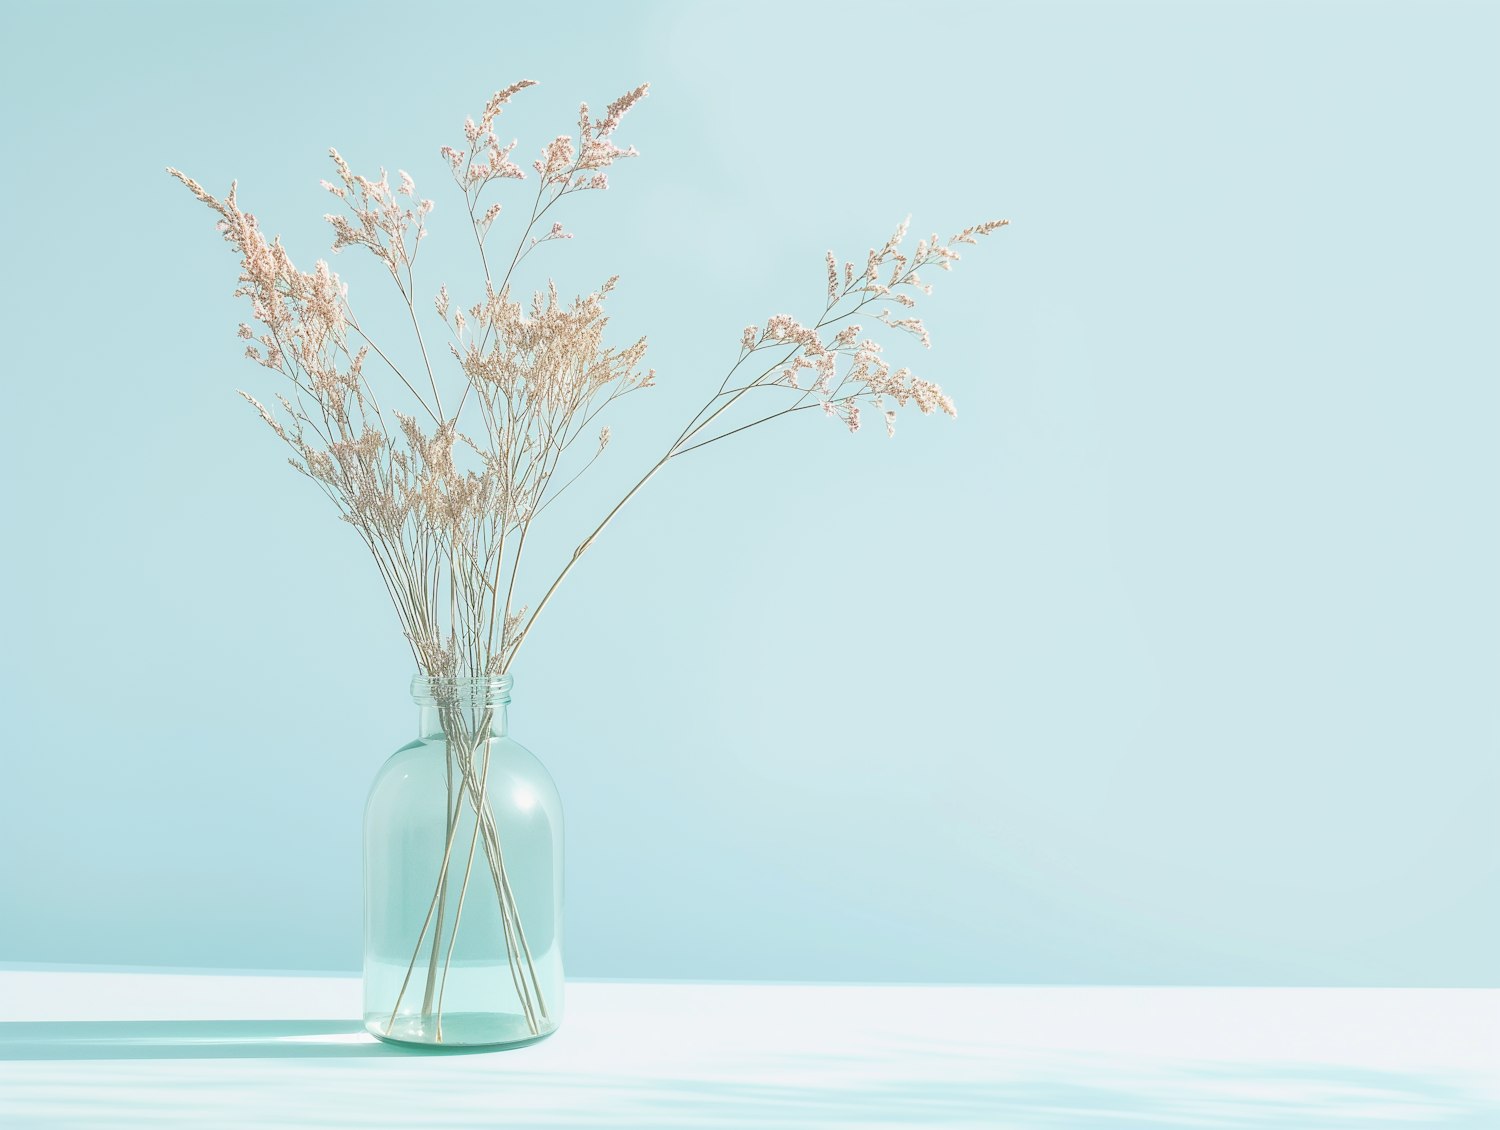 Minimalist Composition with Dried Flowers